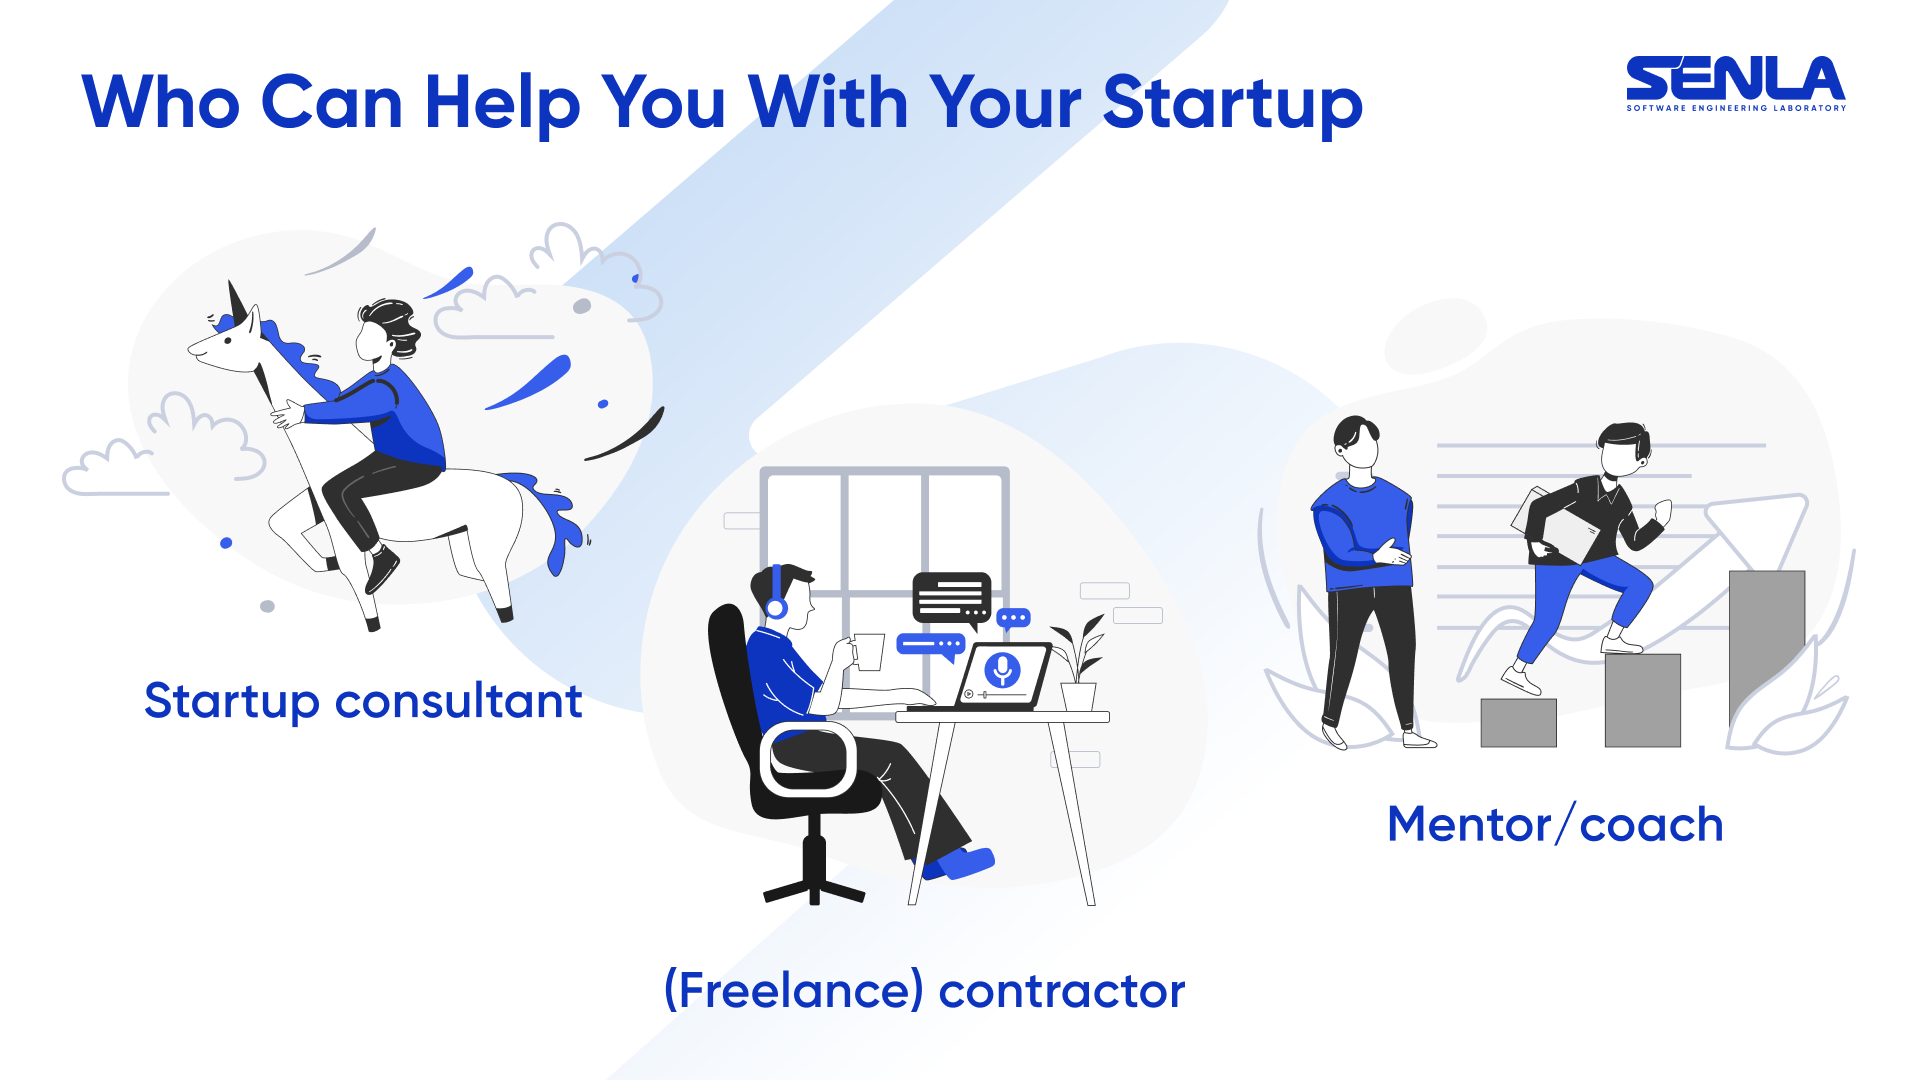 Who can help you with your startup